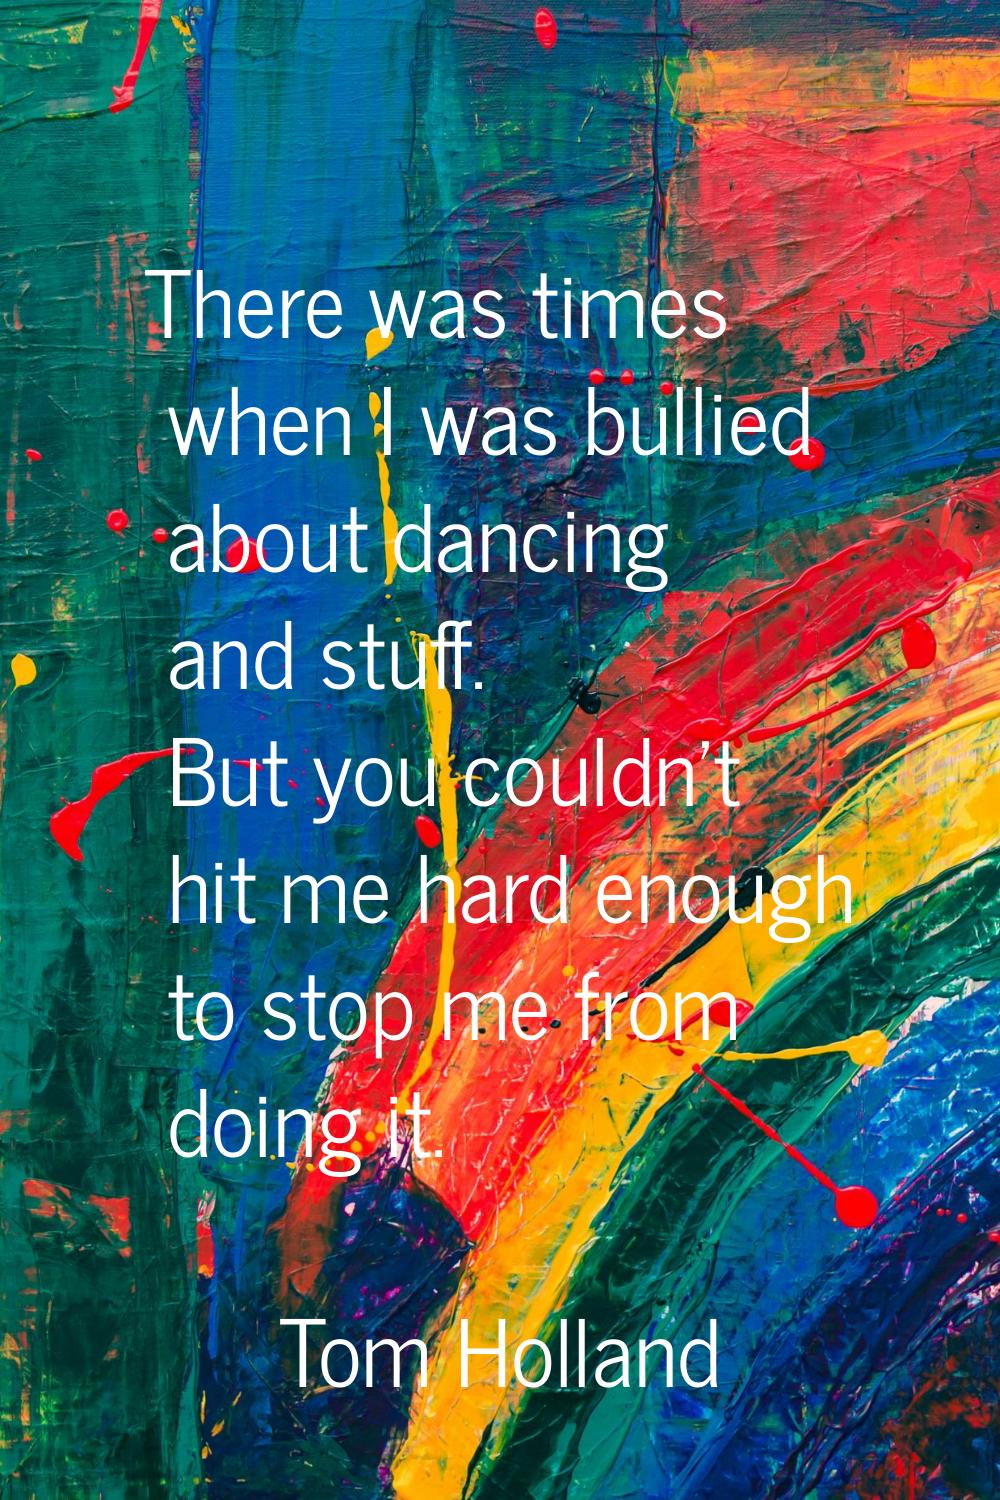 There was times when I was bullied about dancing and stuff. But you couldn't hit me hard enough to 